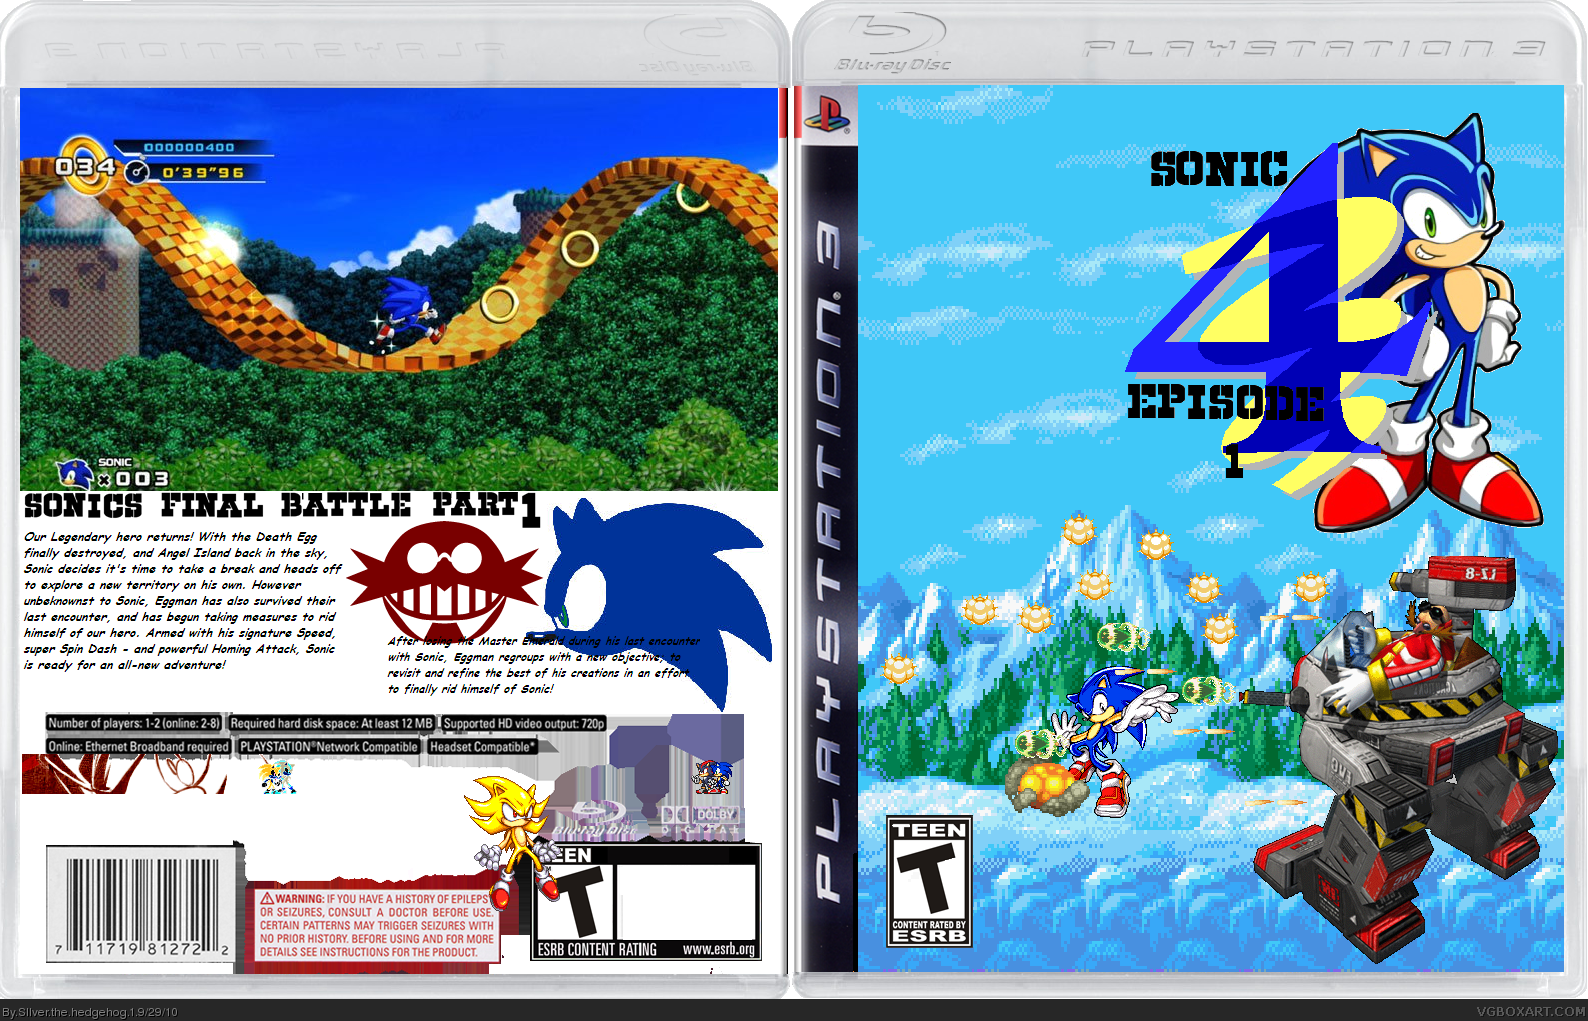 Sonic The Hedgehog 4 box cover